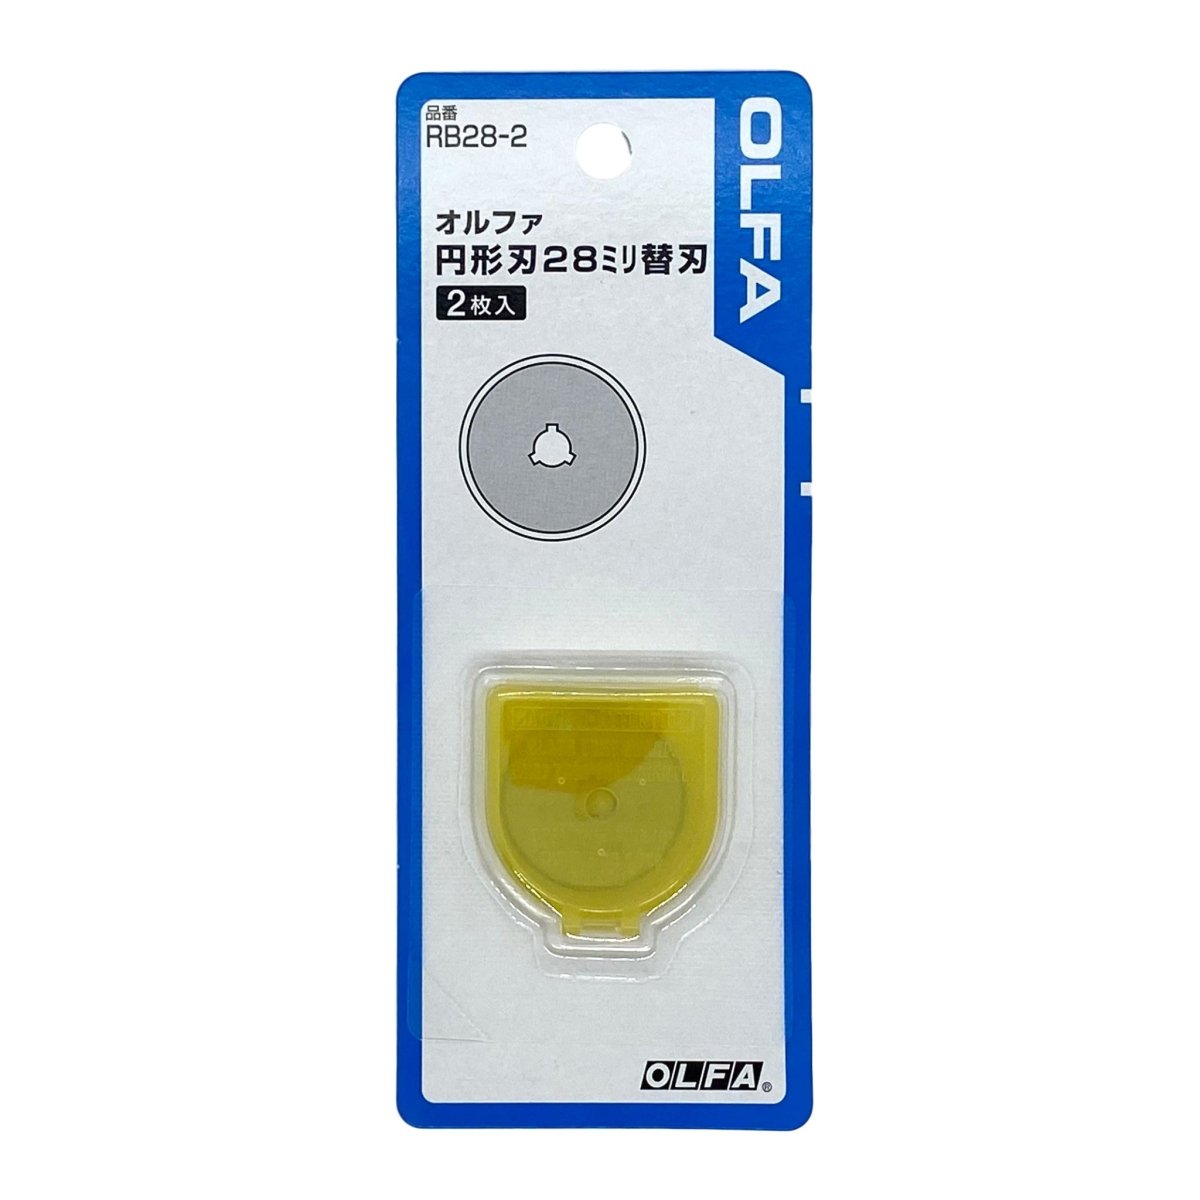 Olfa - Rotary Cutter Spare Blades - 2 Pack - 28 mm - Sewing Gem